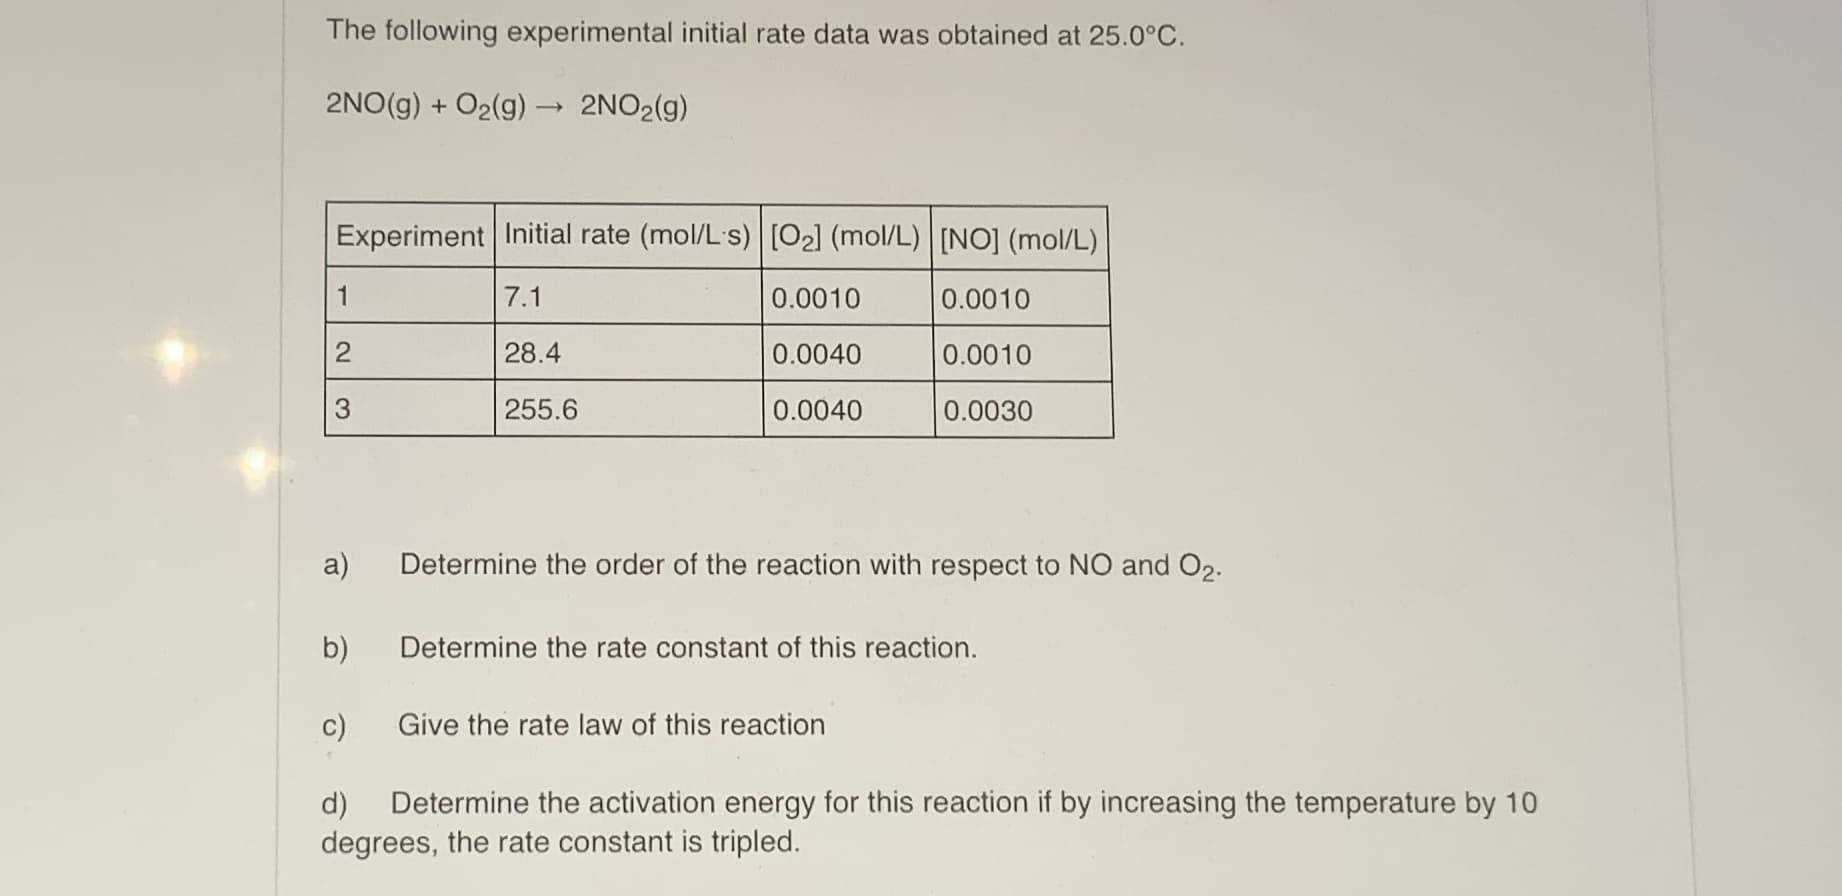 The following experimental initial rate data was obtained at 25.0°C.
2NO(g) + O2(g) → 2NO2(g)
Experiment Initial rate (mol/L's) [O2] (mol/L) [NO] (mol/L)
7.1
0.0010
0.0010
28.4
0.0040
0.0010
255.6
0.0040
0.0030
a)
Determine the order of the reaction with respect to NO and O2.
b)
Determine the rate constant of this reaction.
c)
Give the rate law of this reaction
2.
